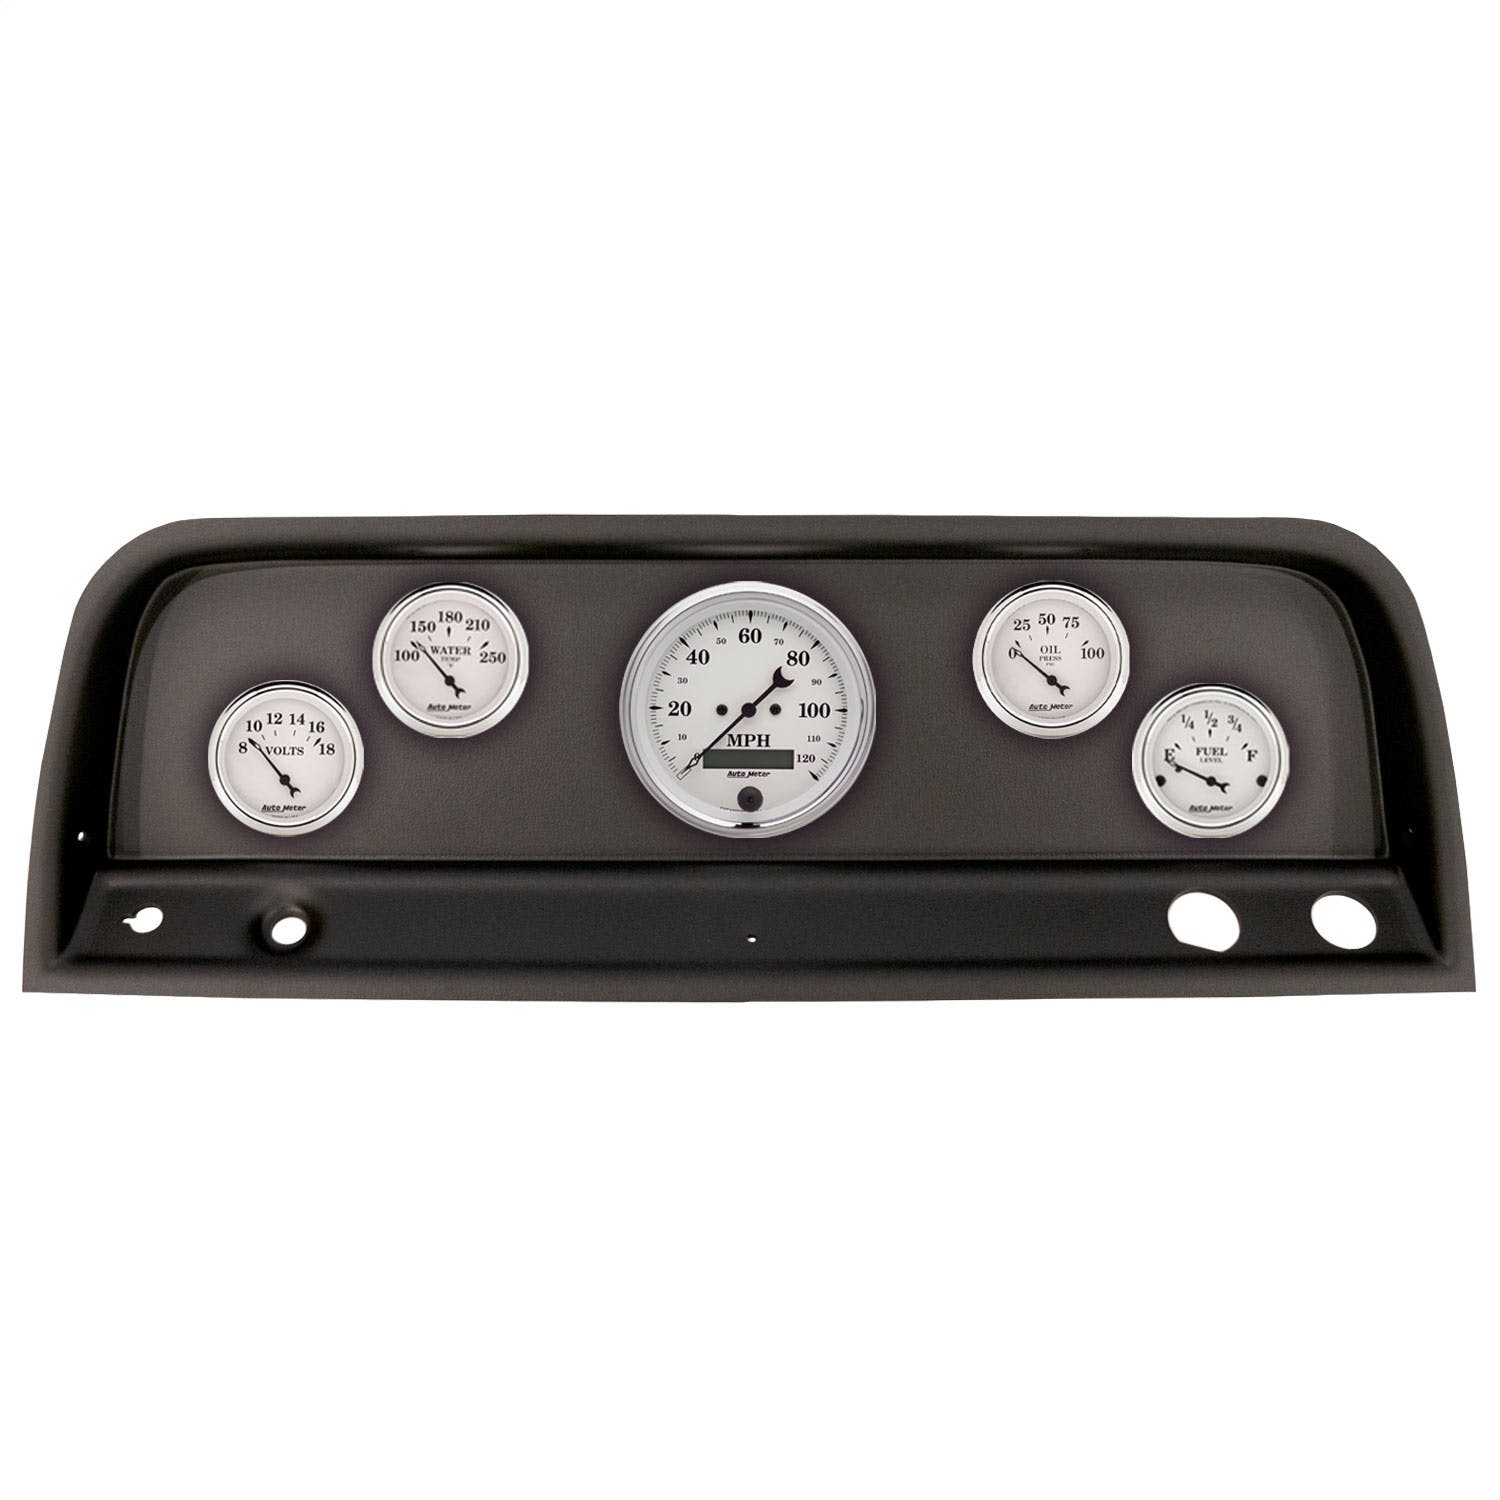 AutoMeter Products 2109-08 5 Gauge Direct-Fit Dash Kit, Chevrolet Truck 64-66, Old Tyme White